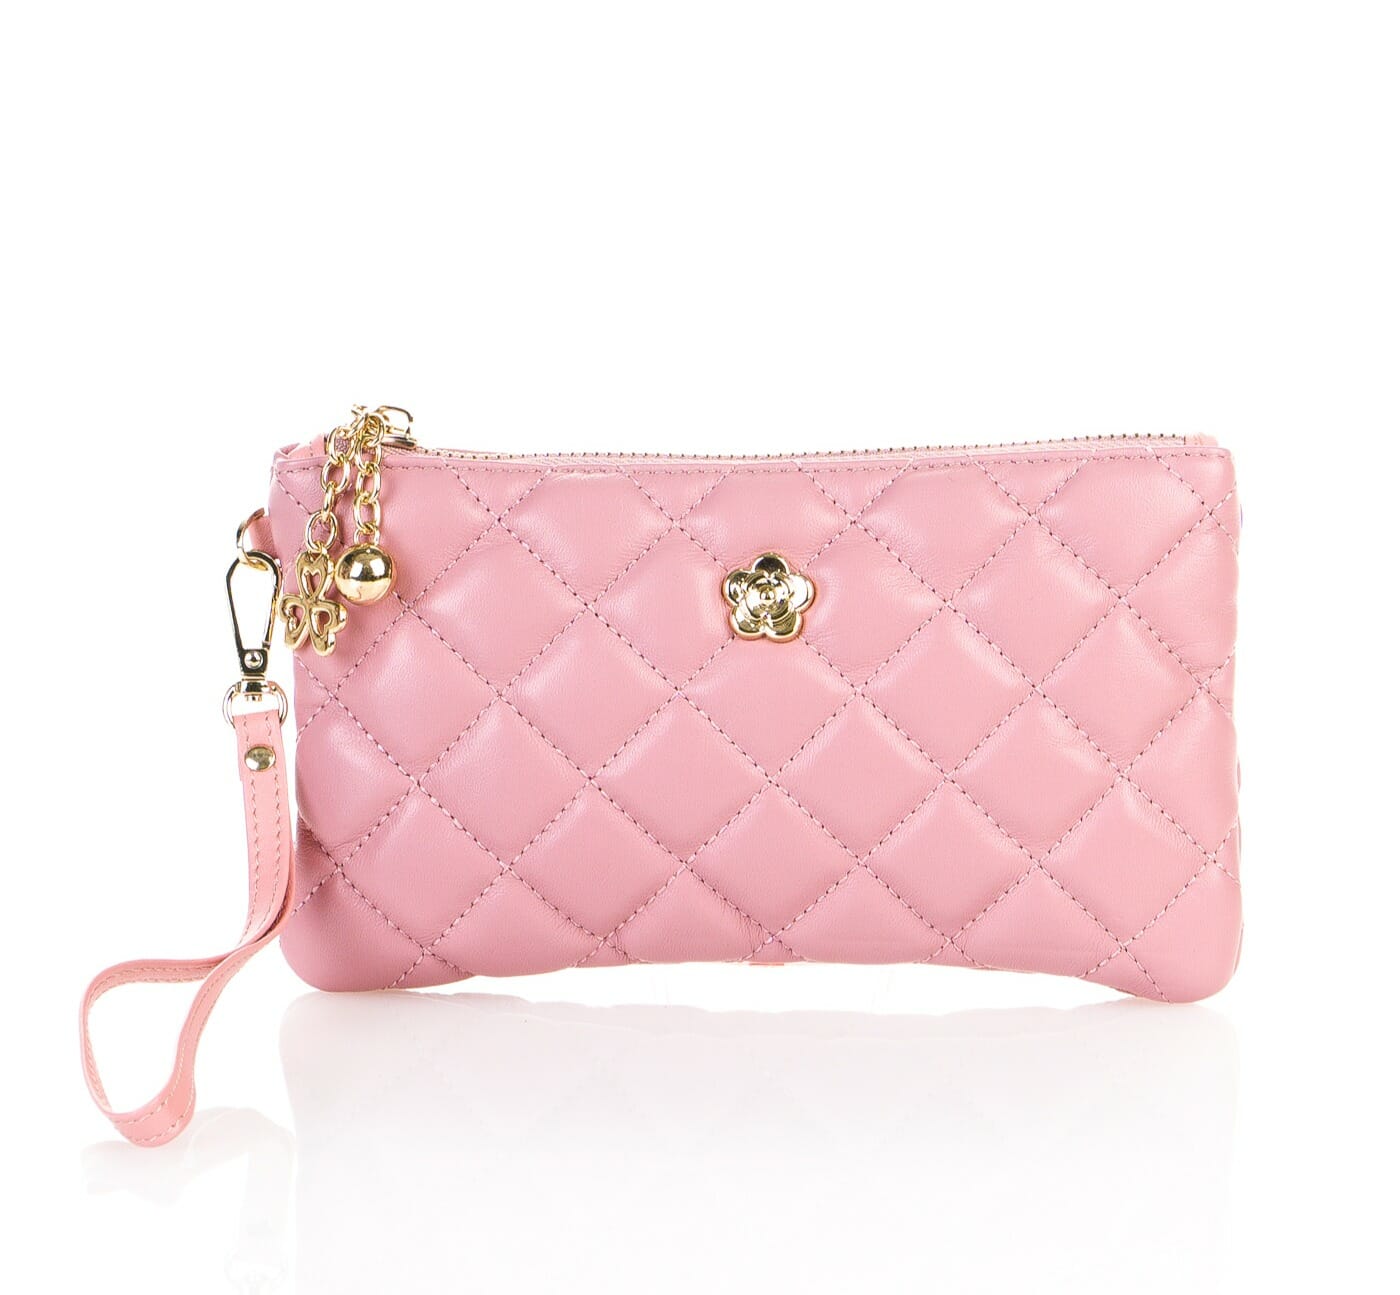 Violetta Clutch Bag in Quilted Leather - ROSE